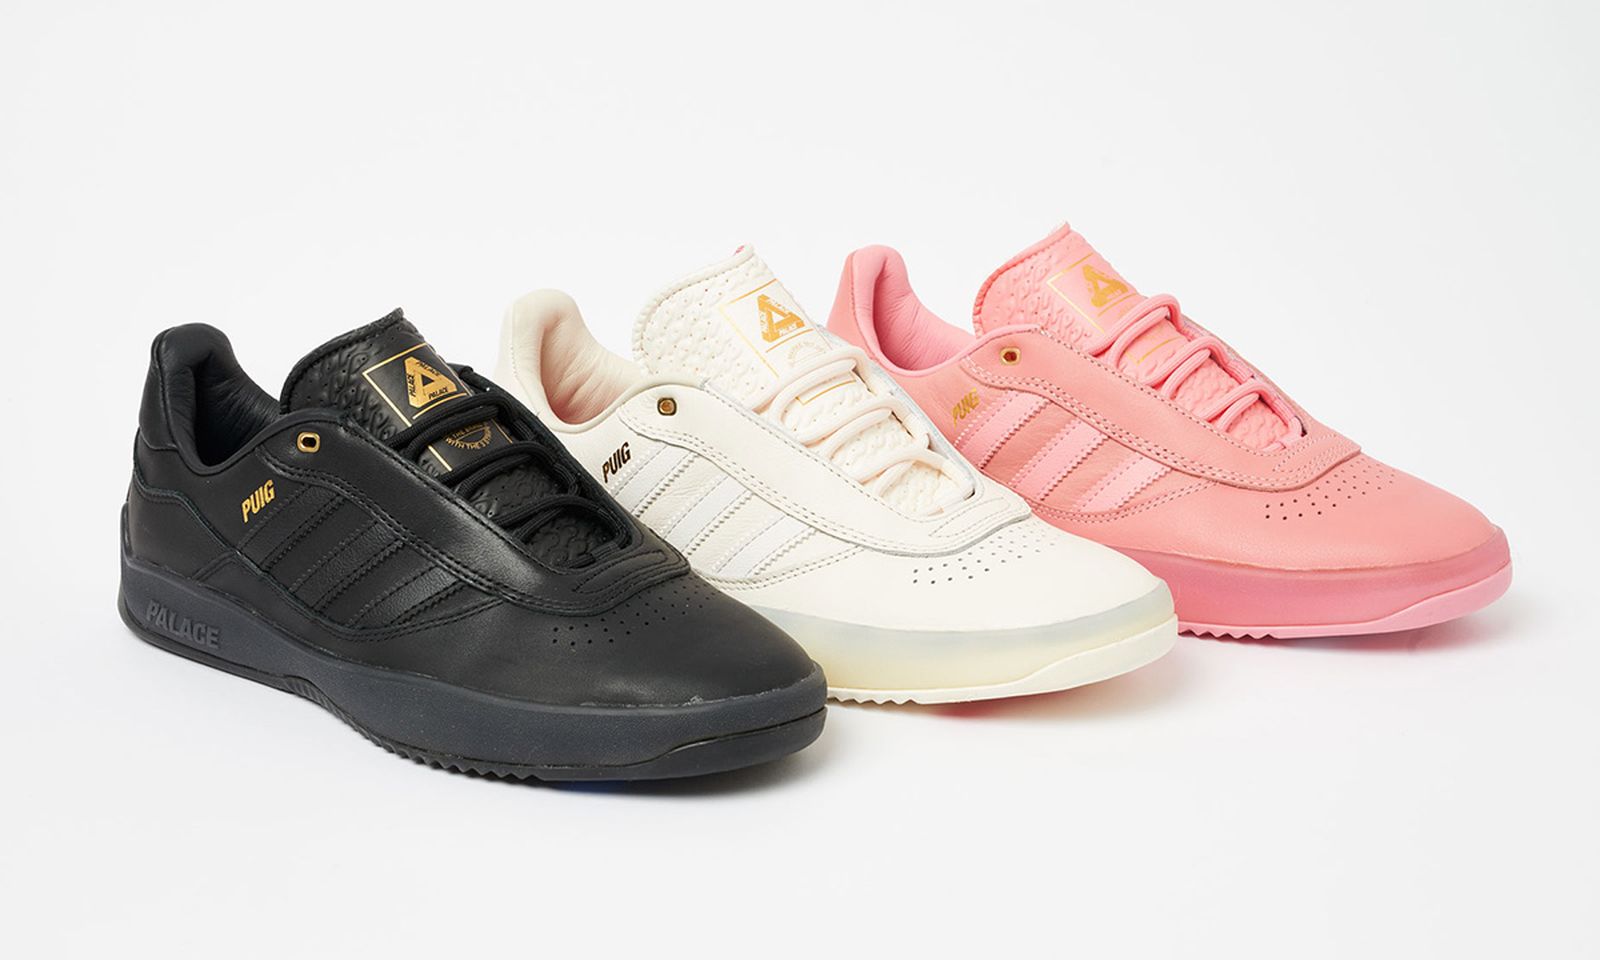 Images of the new adidas x Palace Skateboards PUIG sneaker